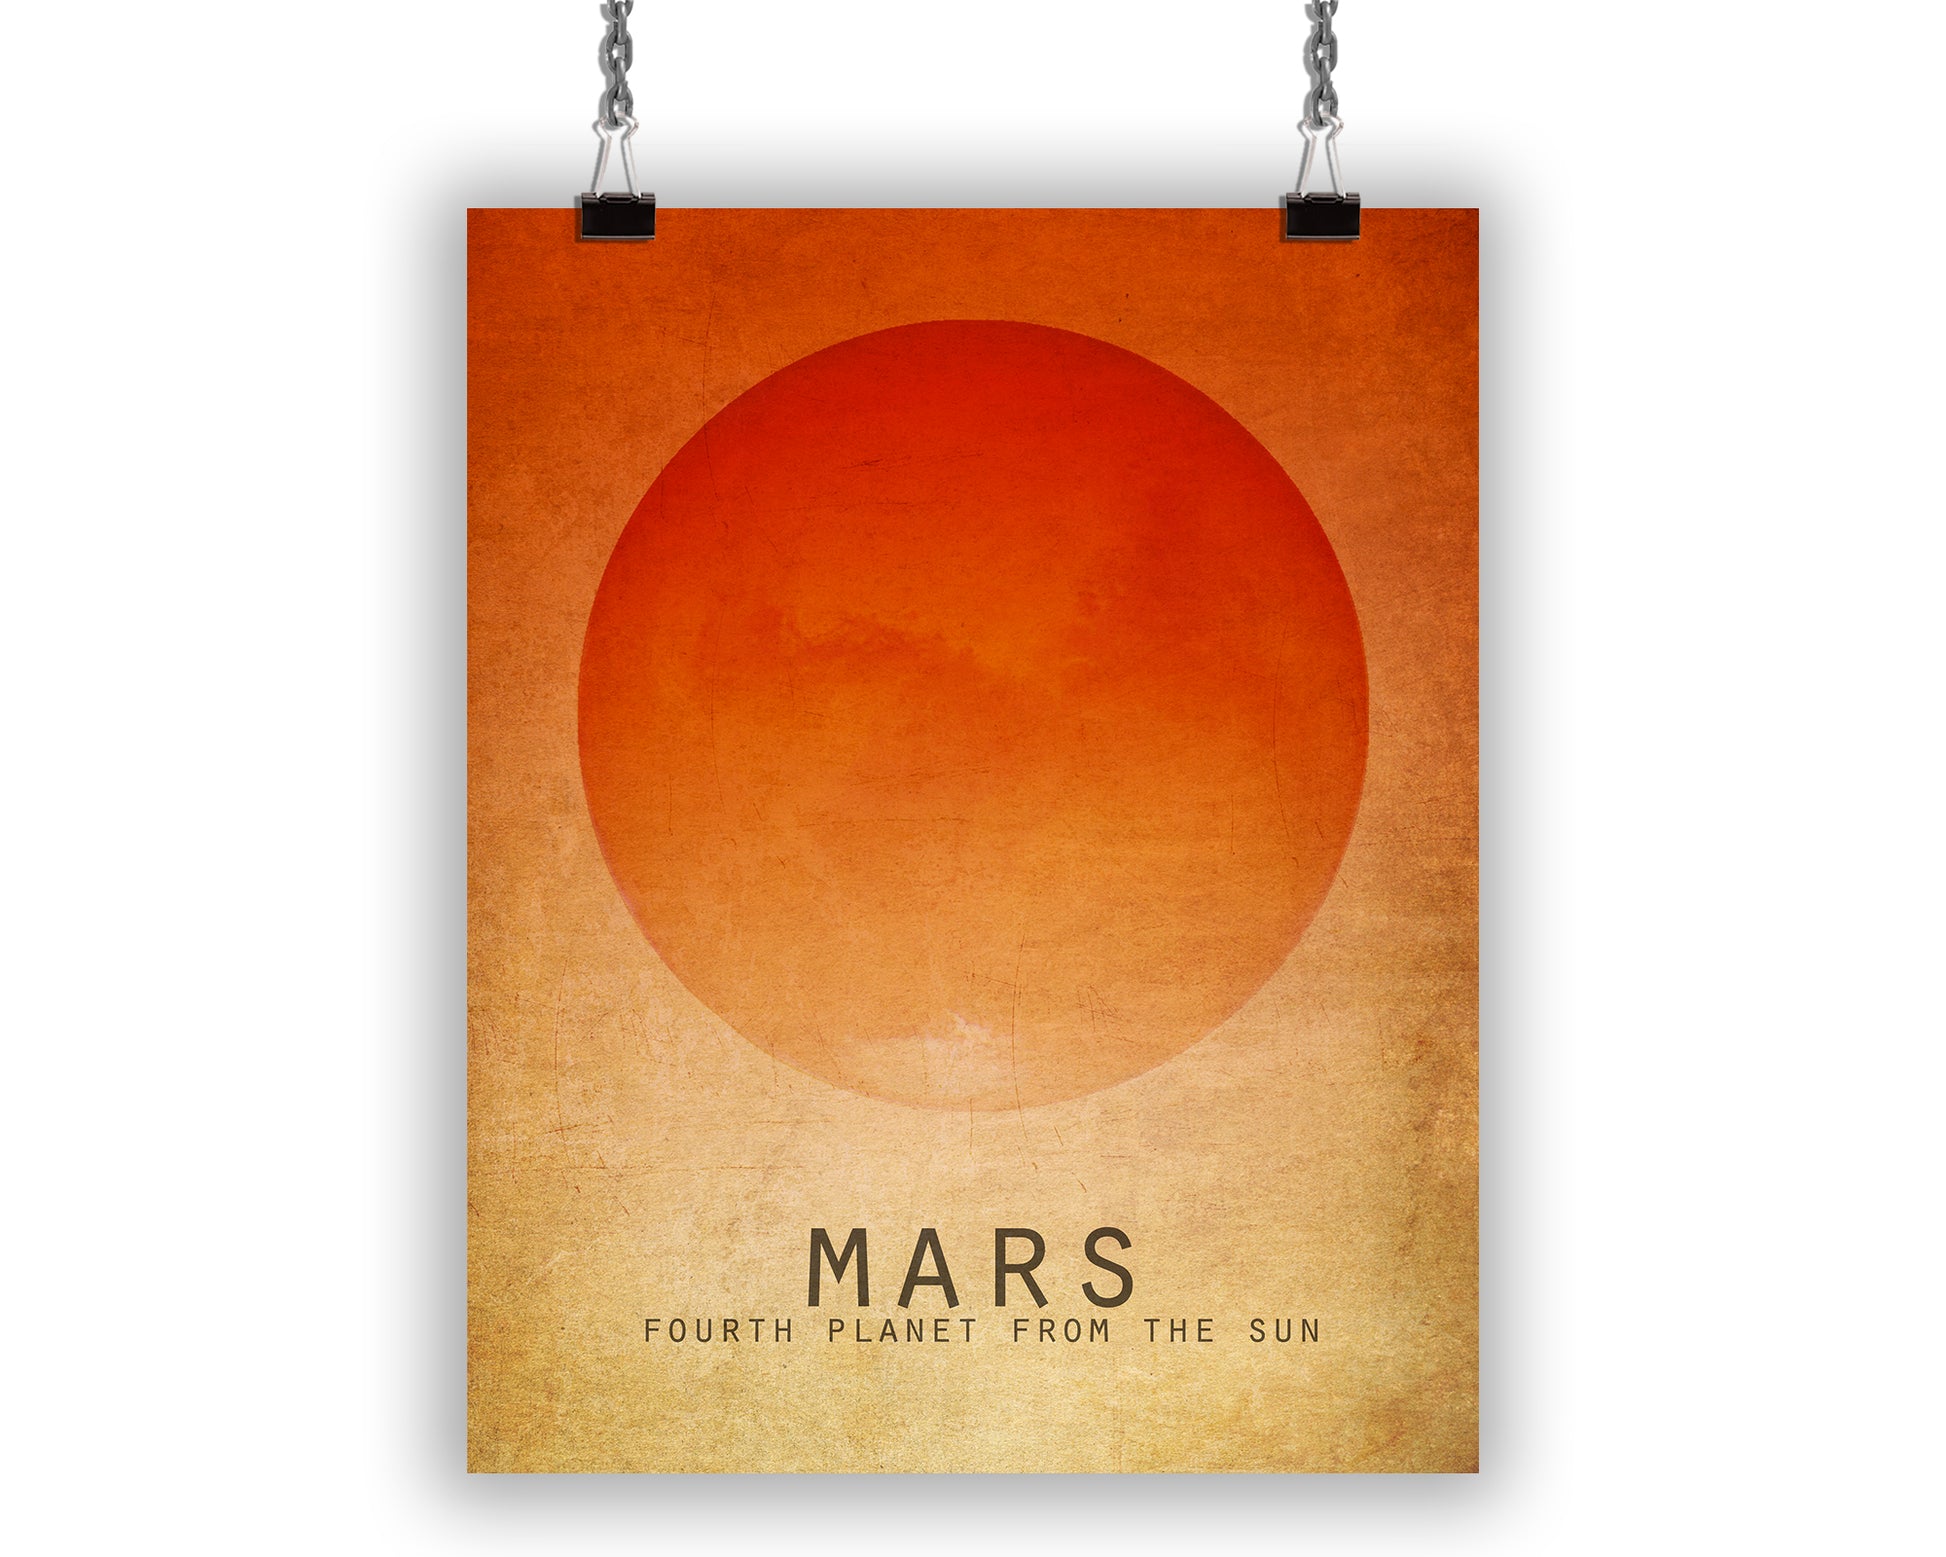 Art Print with minimalist red image of the planet mars